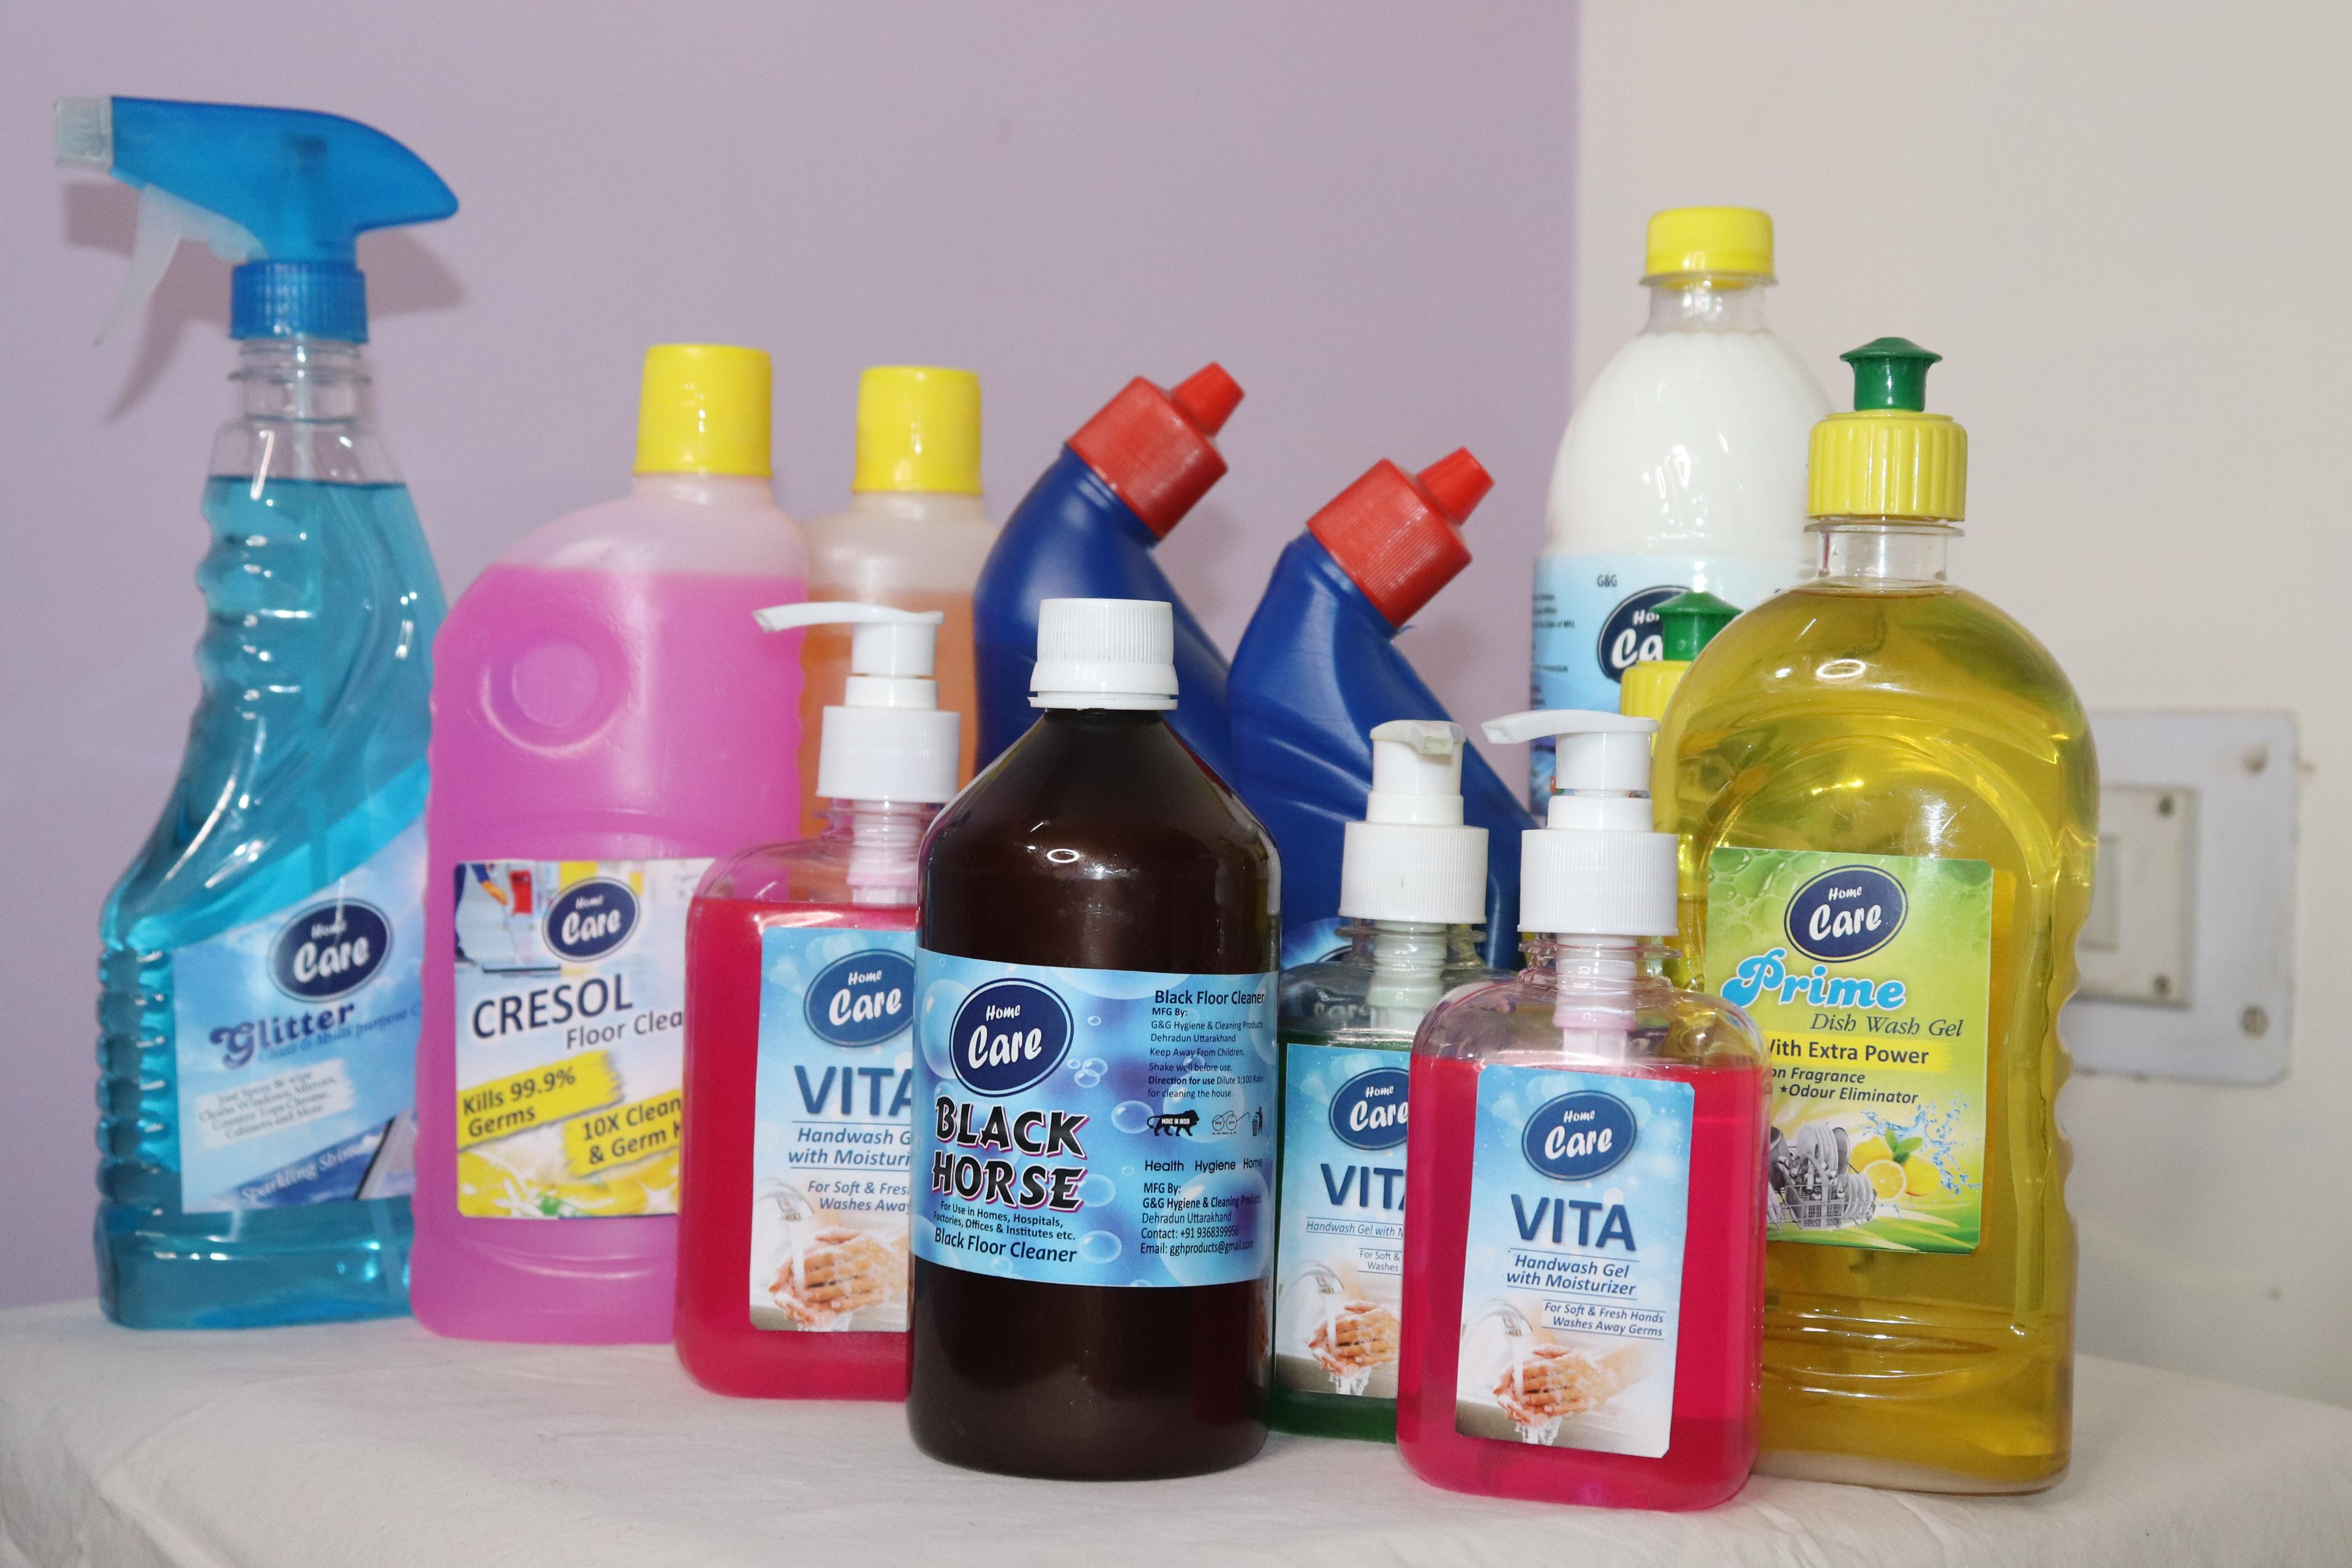 G&G Hygiene and Cleaning Products